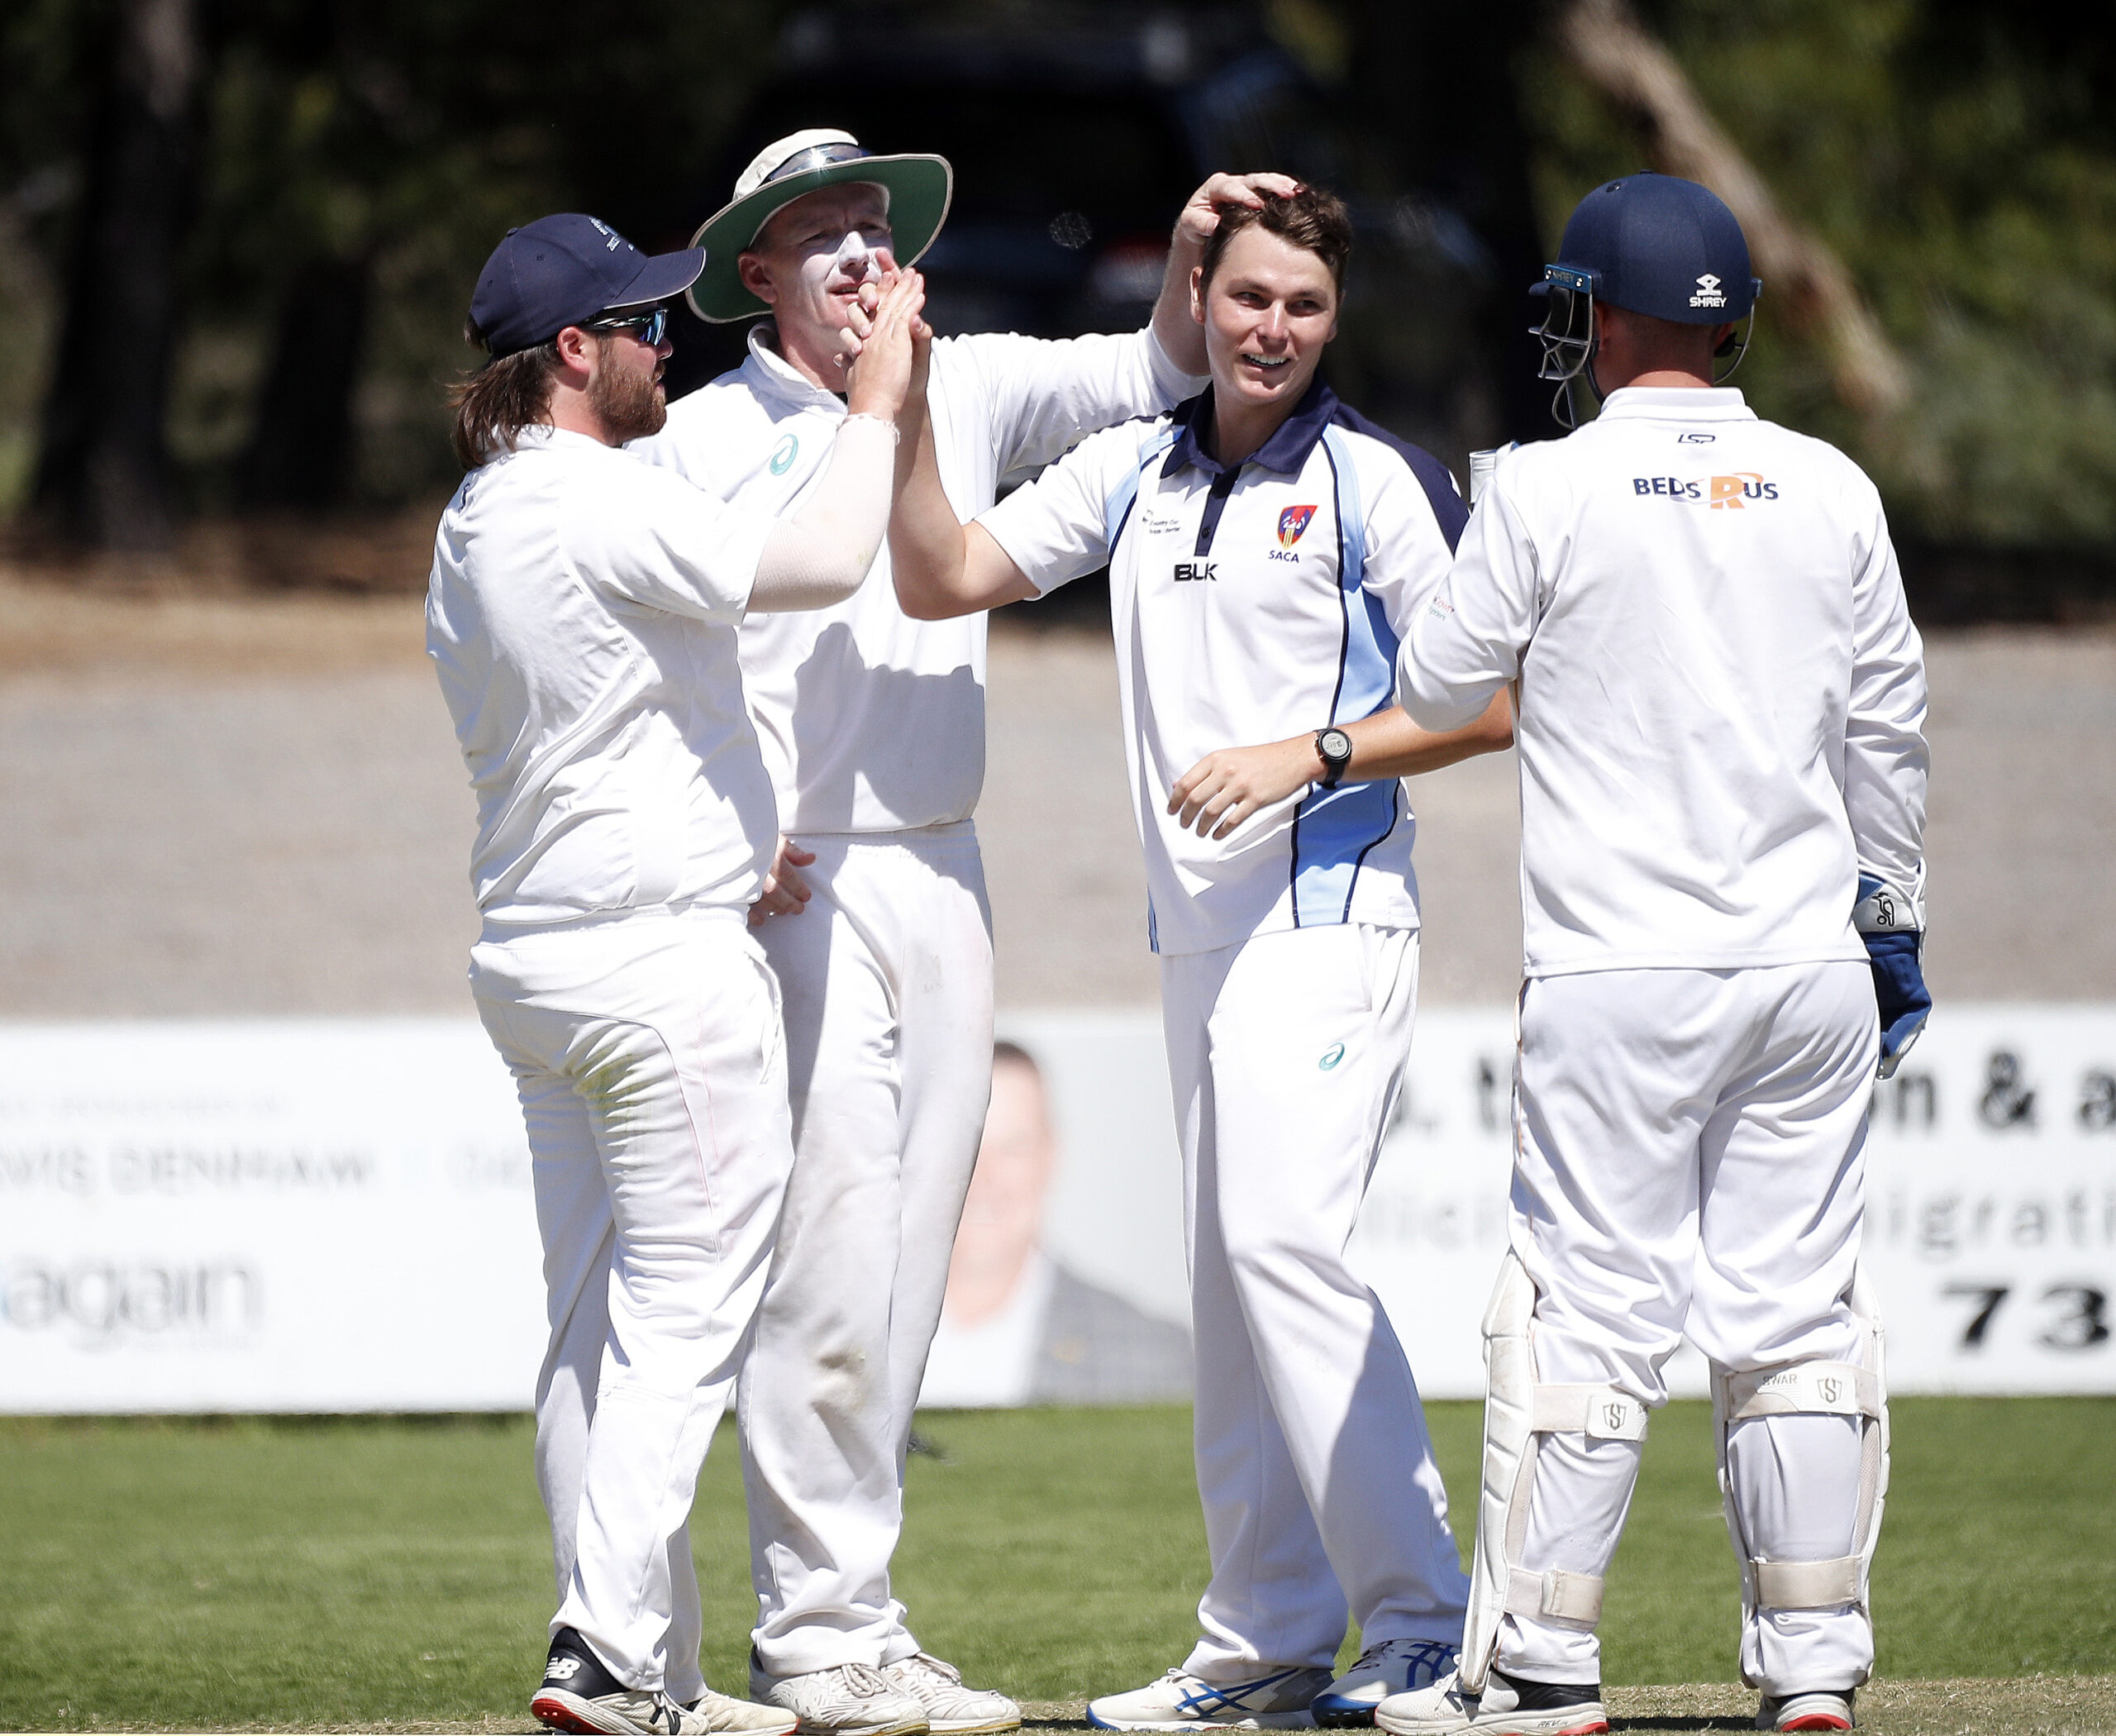 Ben Jurd being congratulated after another wicket on Wedensday